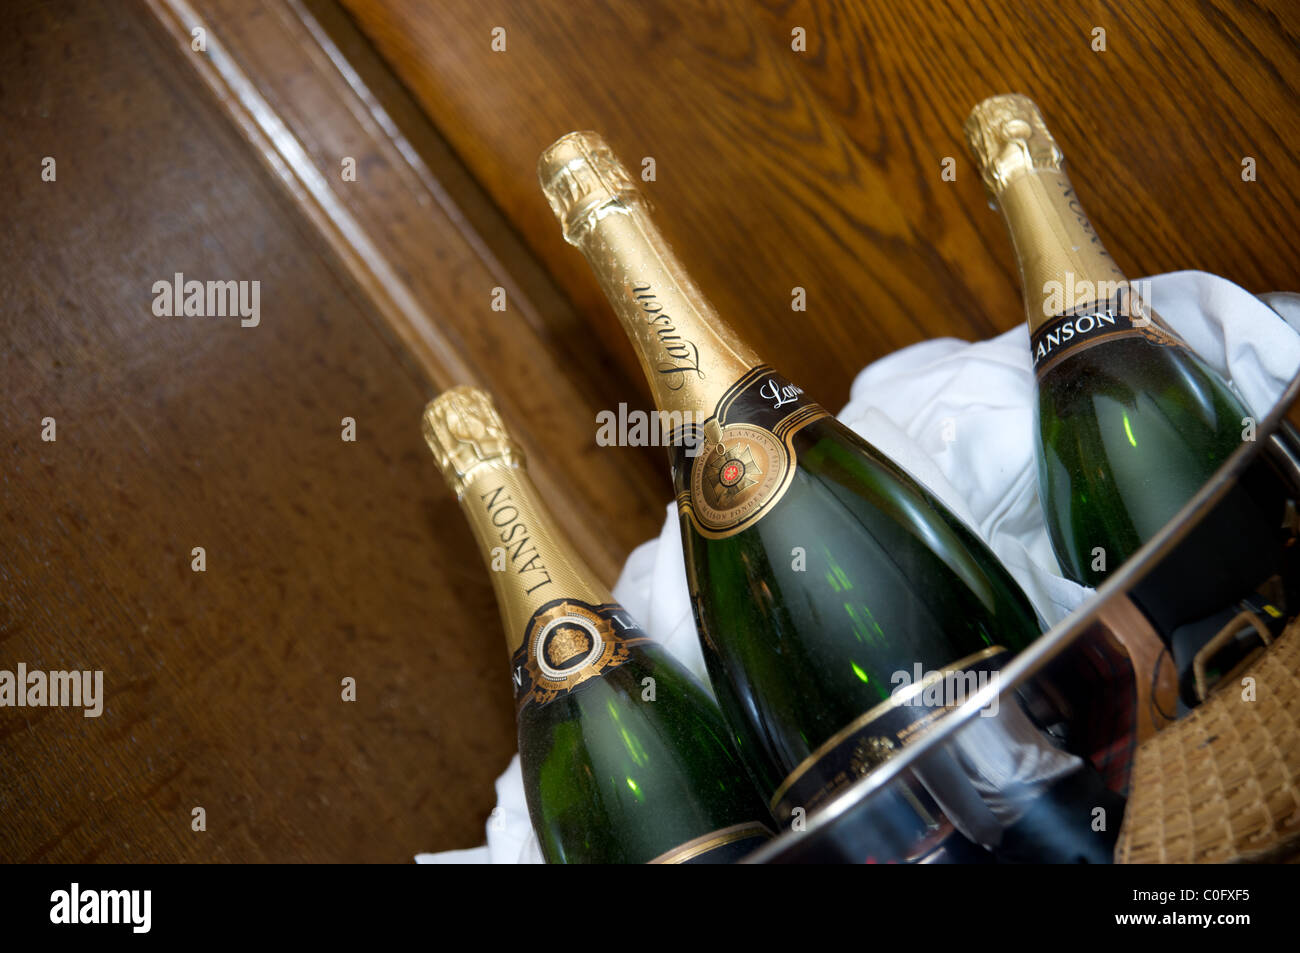 Champagne on ice at a wedding reception Stock Photo